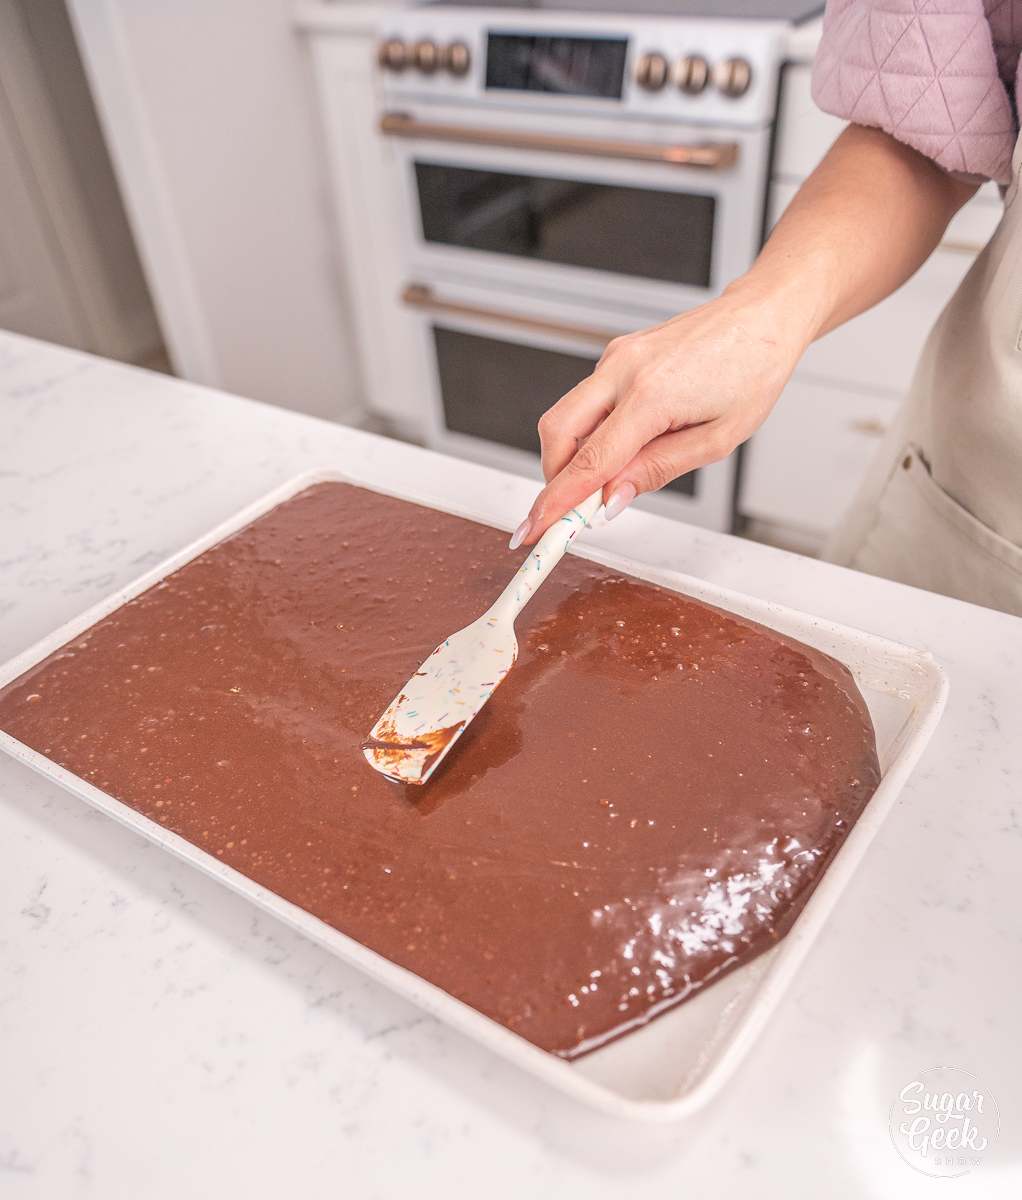 hand smoothing out cake batter using a spatula